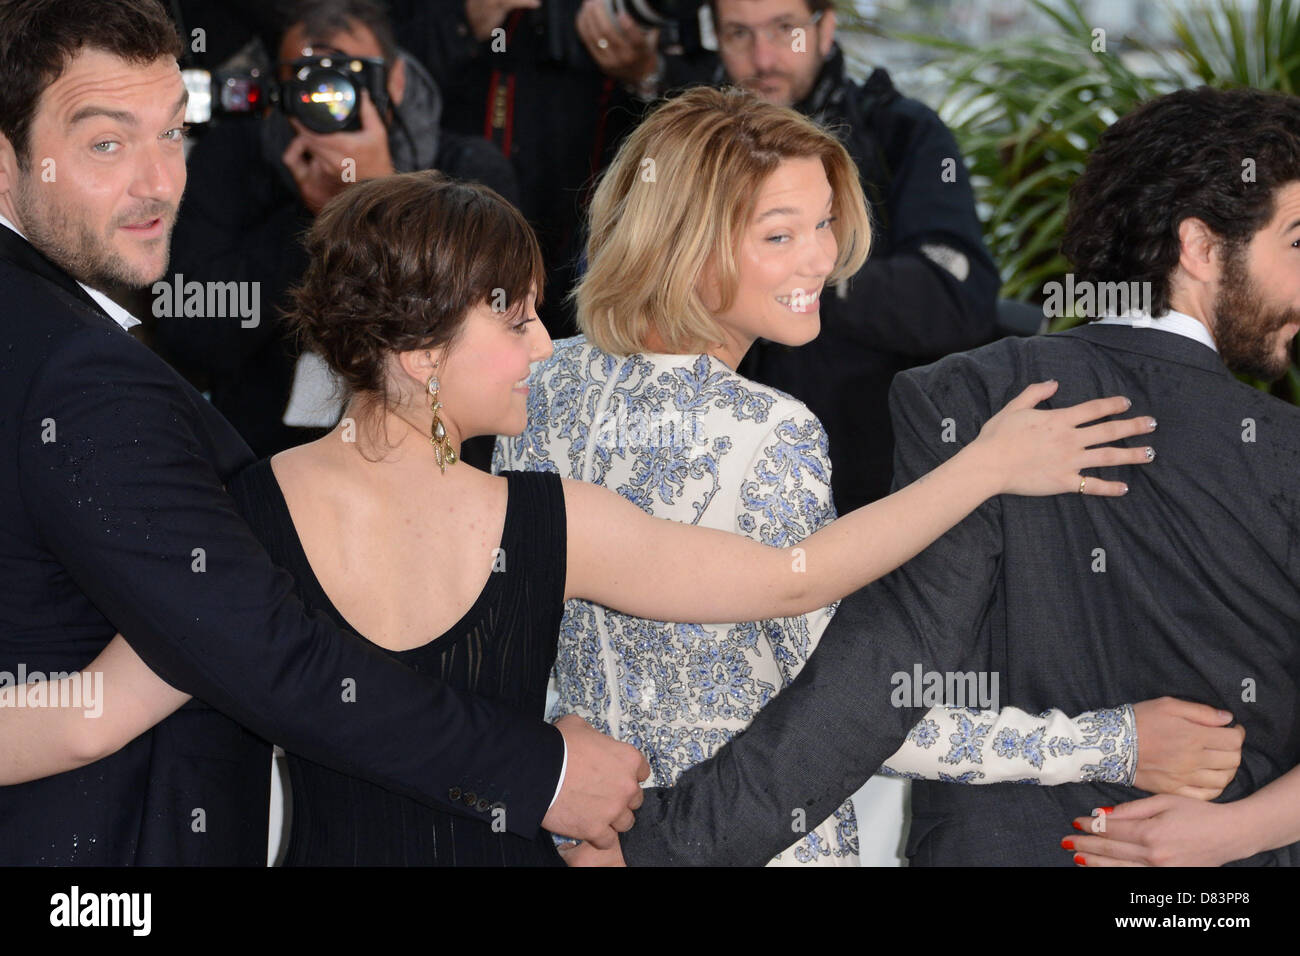 Cannes France 18th May 2013 L R Actors Denis Menochet Camille Lellouche Lea Seydoux Tahar Rahim And Director Rebecca Zlotowski Attend The Photocall For Grand Central During The 66th Annual Cannes Film Festival